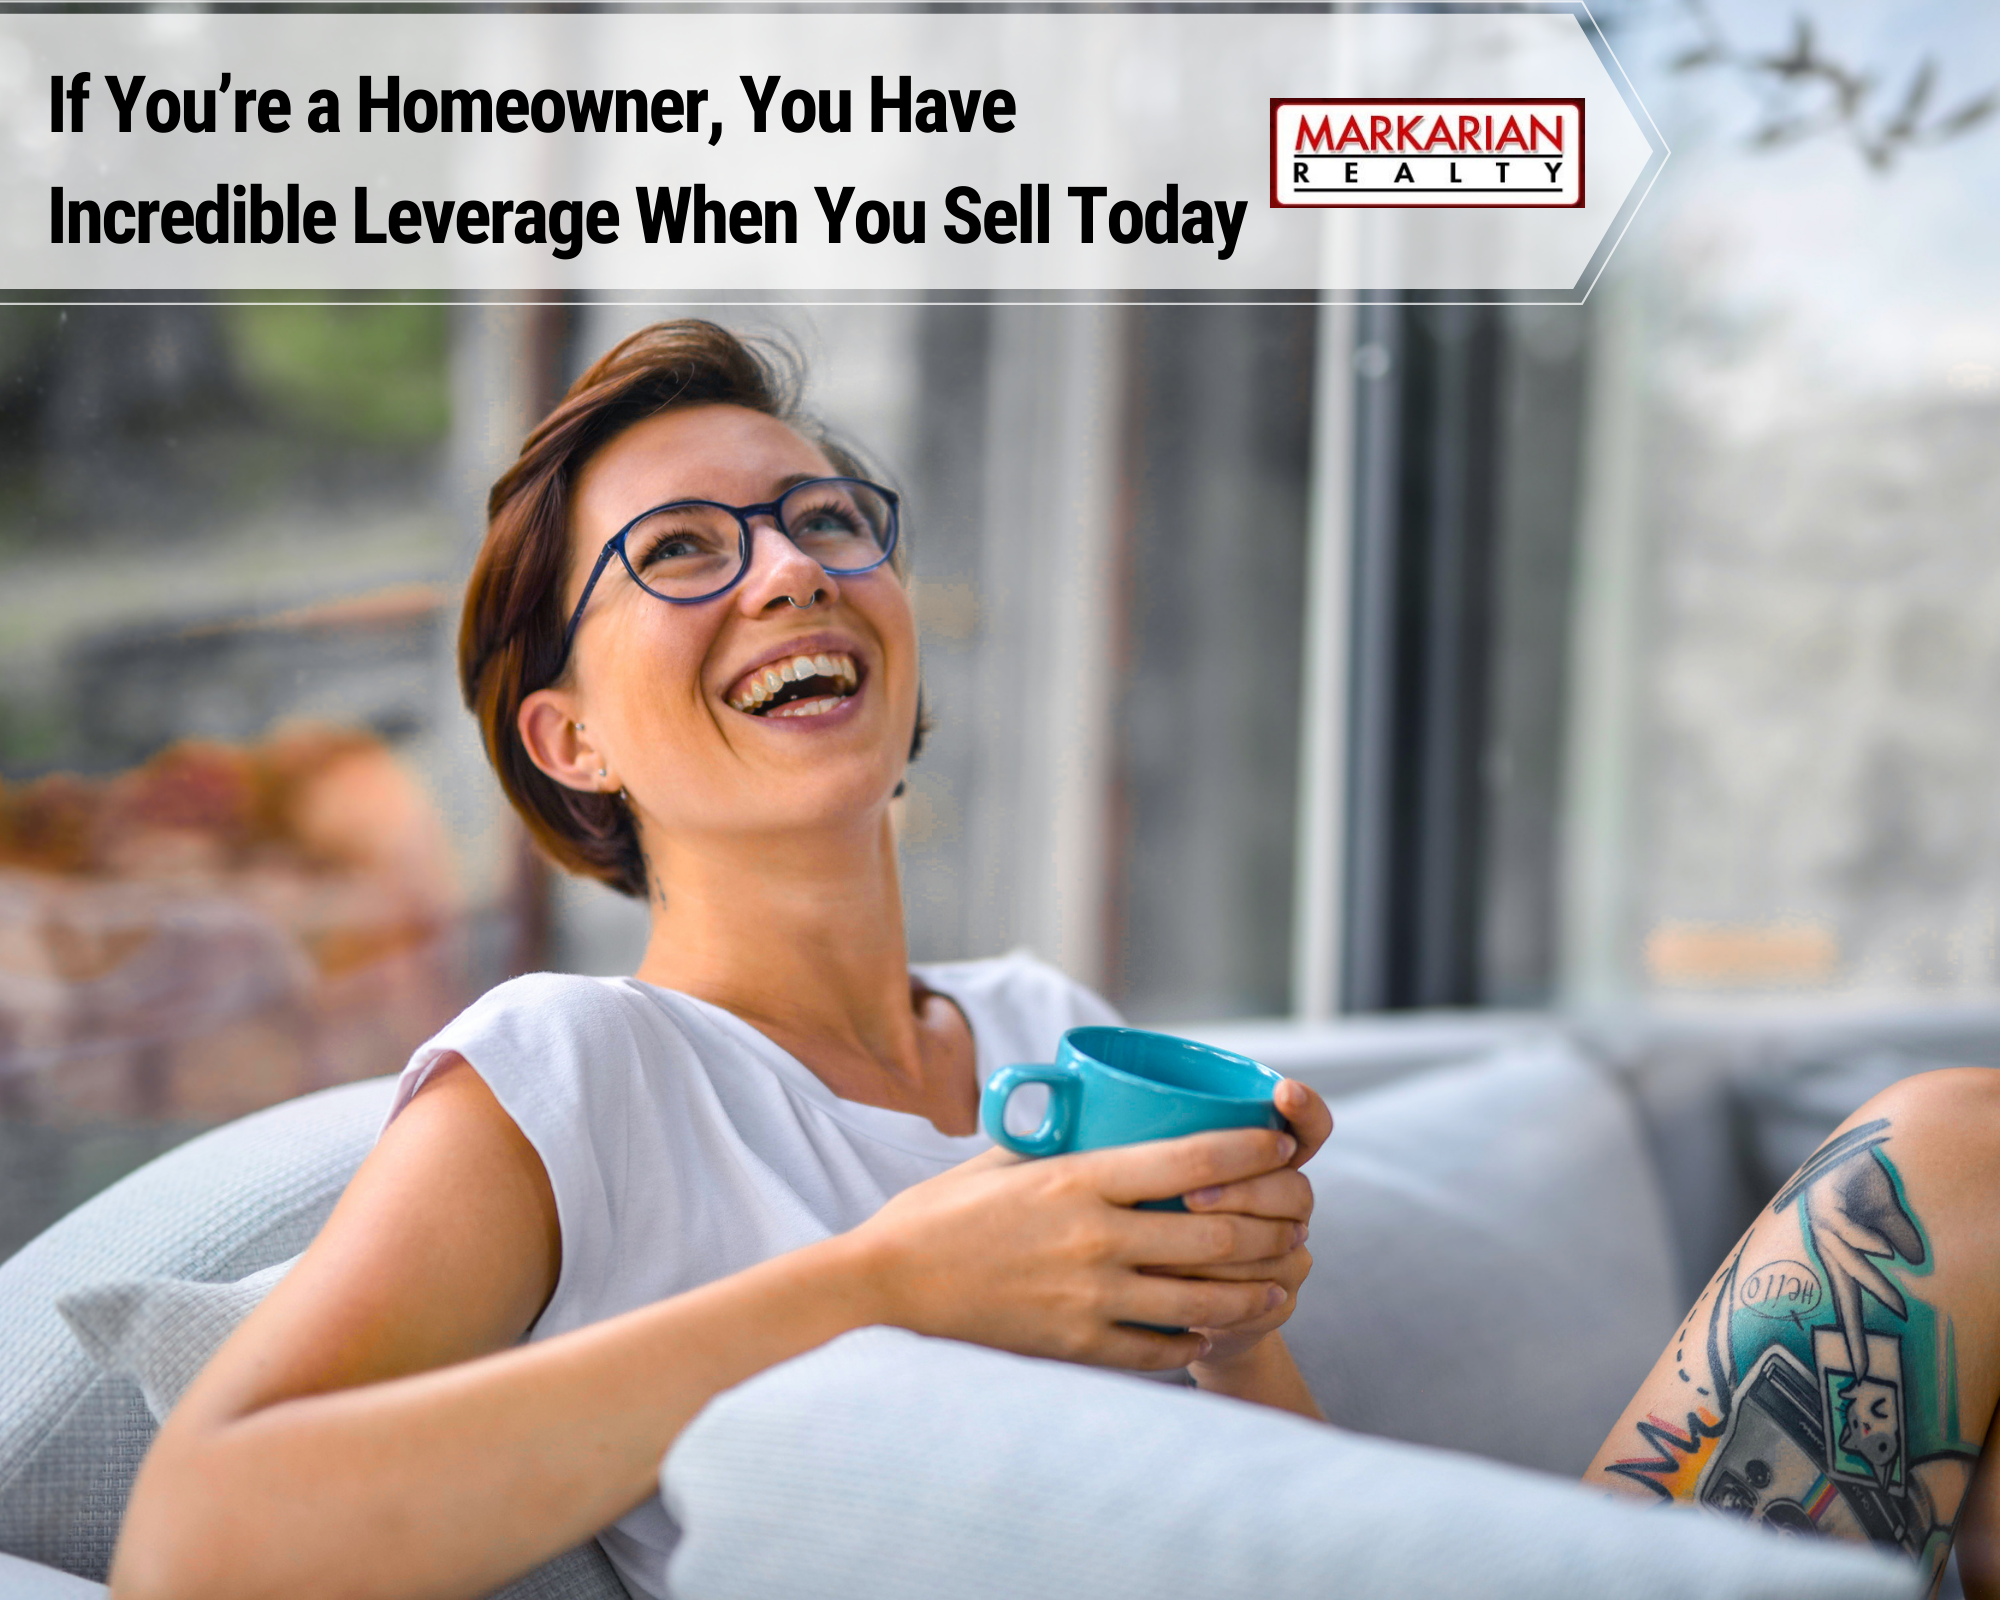   If You’re a Homeowner, You Have Incredible Leverage When You Sell Today